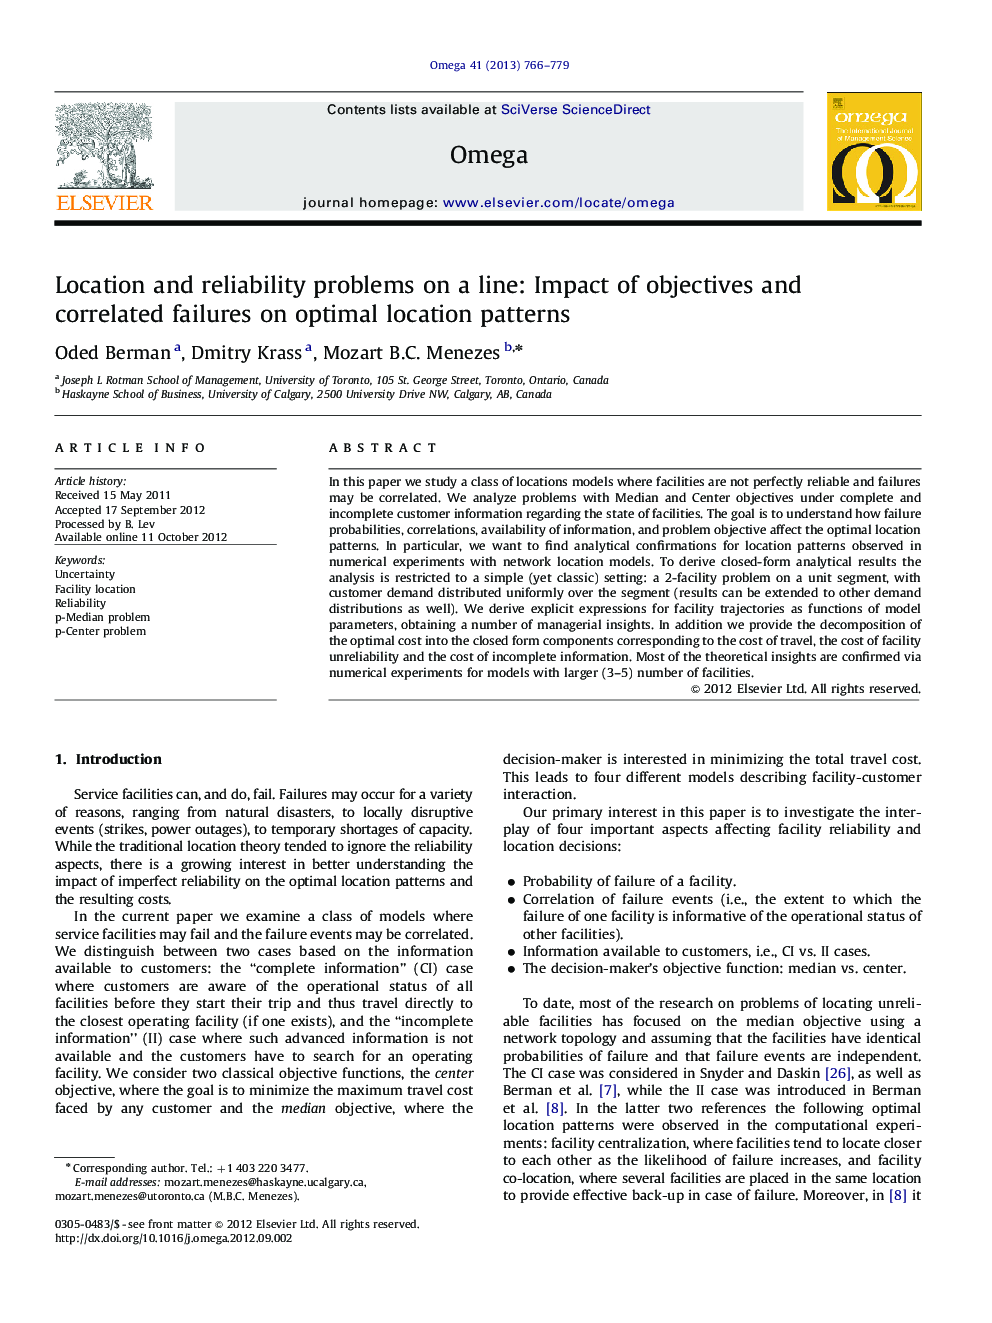 Location and reliability problems on a line: Impact of objectives and correlated failures on optimal location patterns